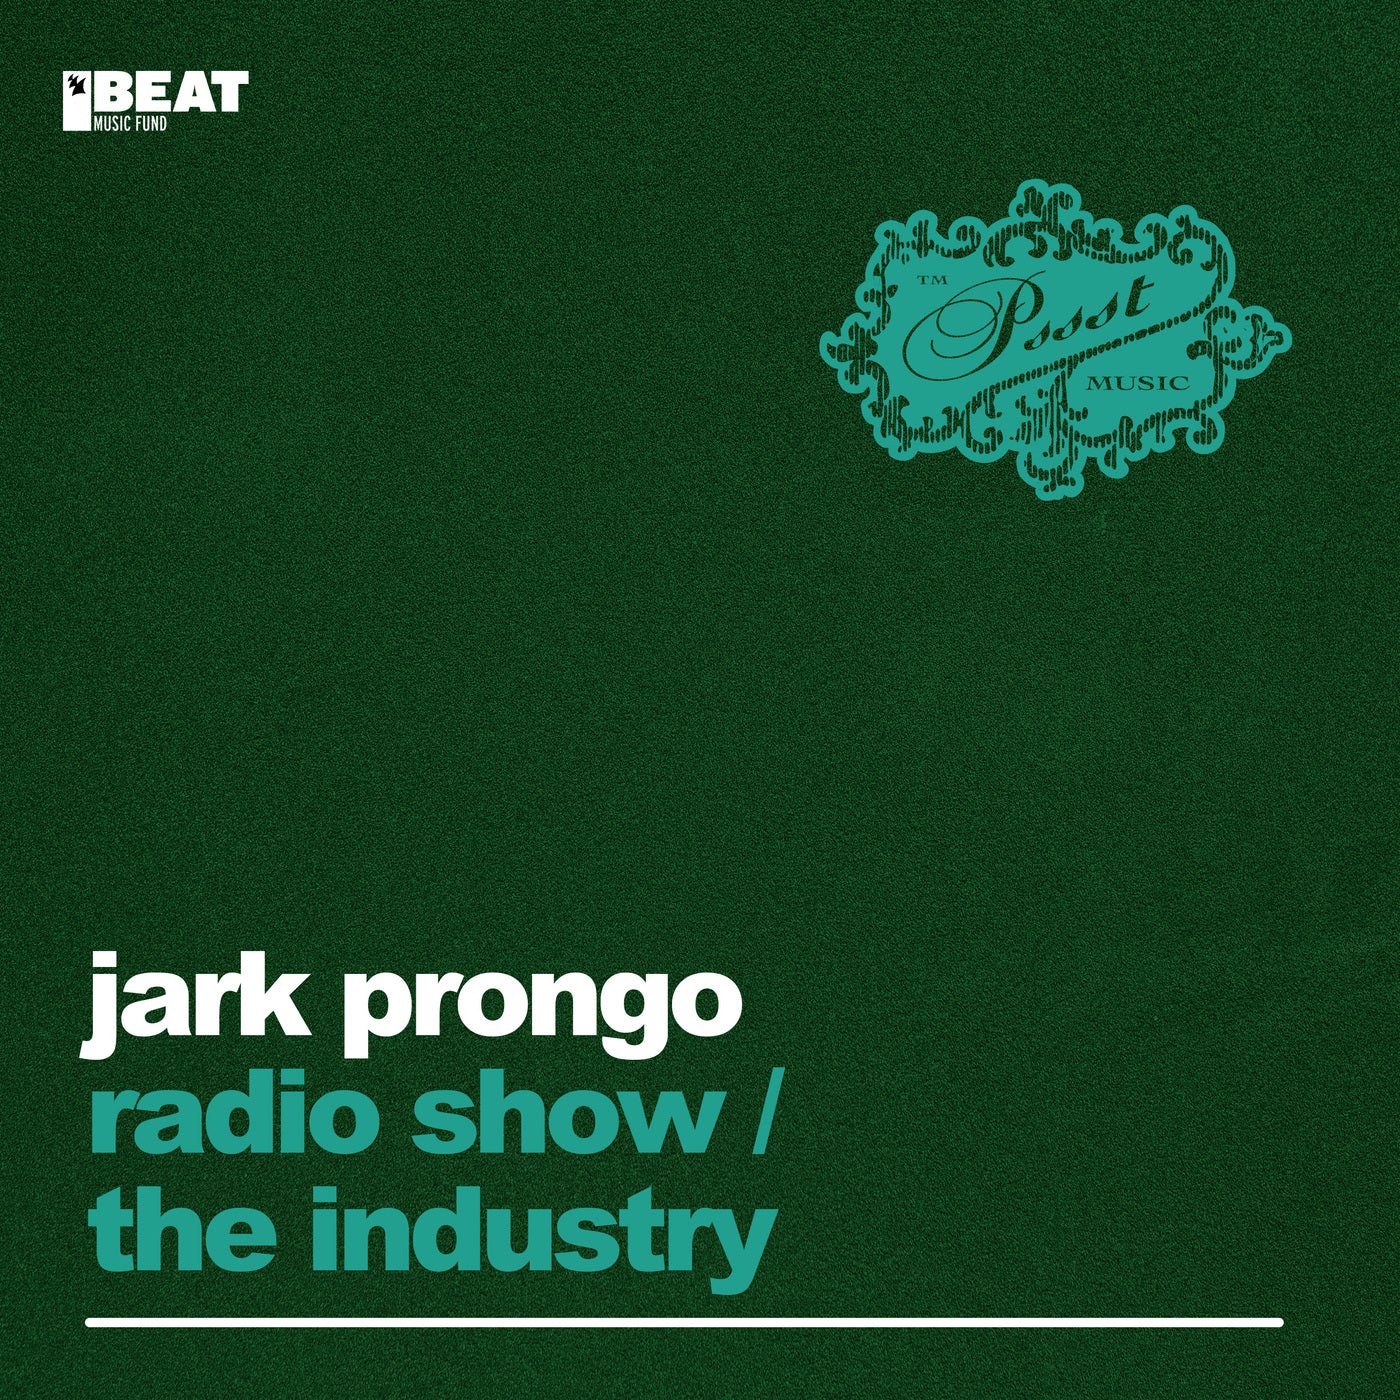 Radio Show / The Industry